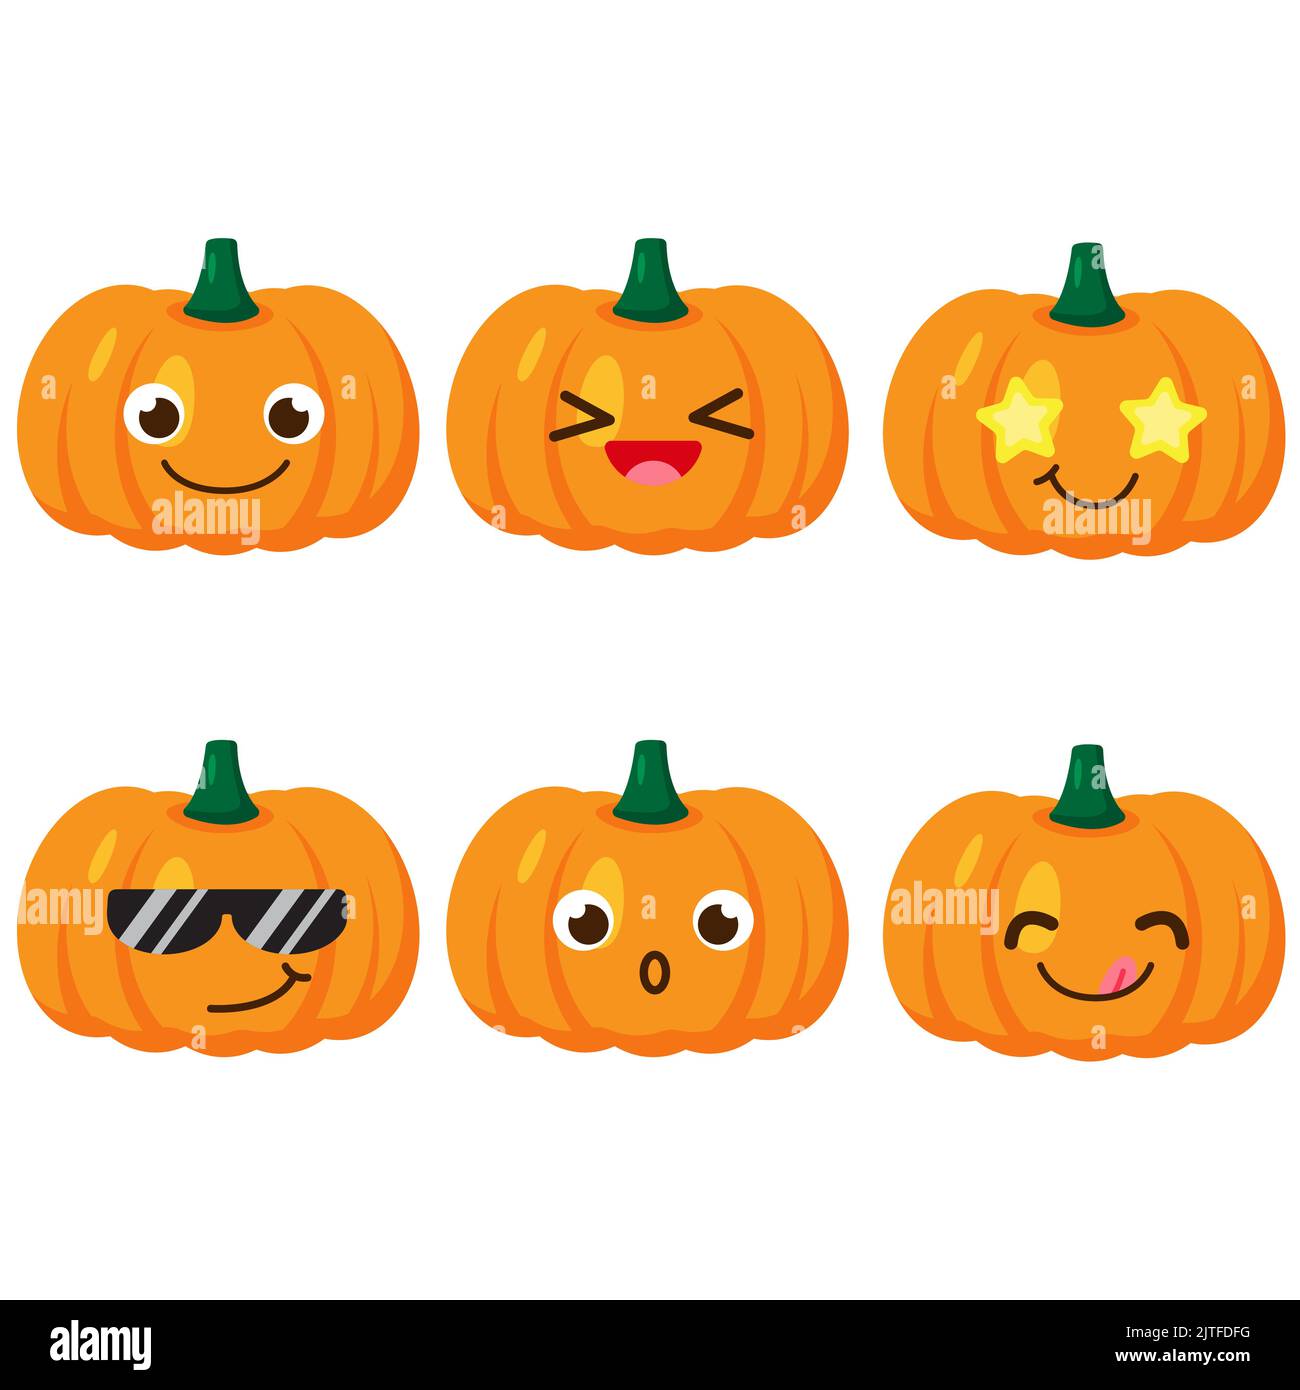 Set of pumpkin emojis. Kawaii style icons, vegetable characters. Vector illustration in cartoon flat style. Set of funny smiles or emoticons. Good Stock Vector